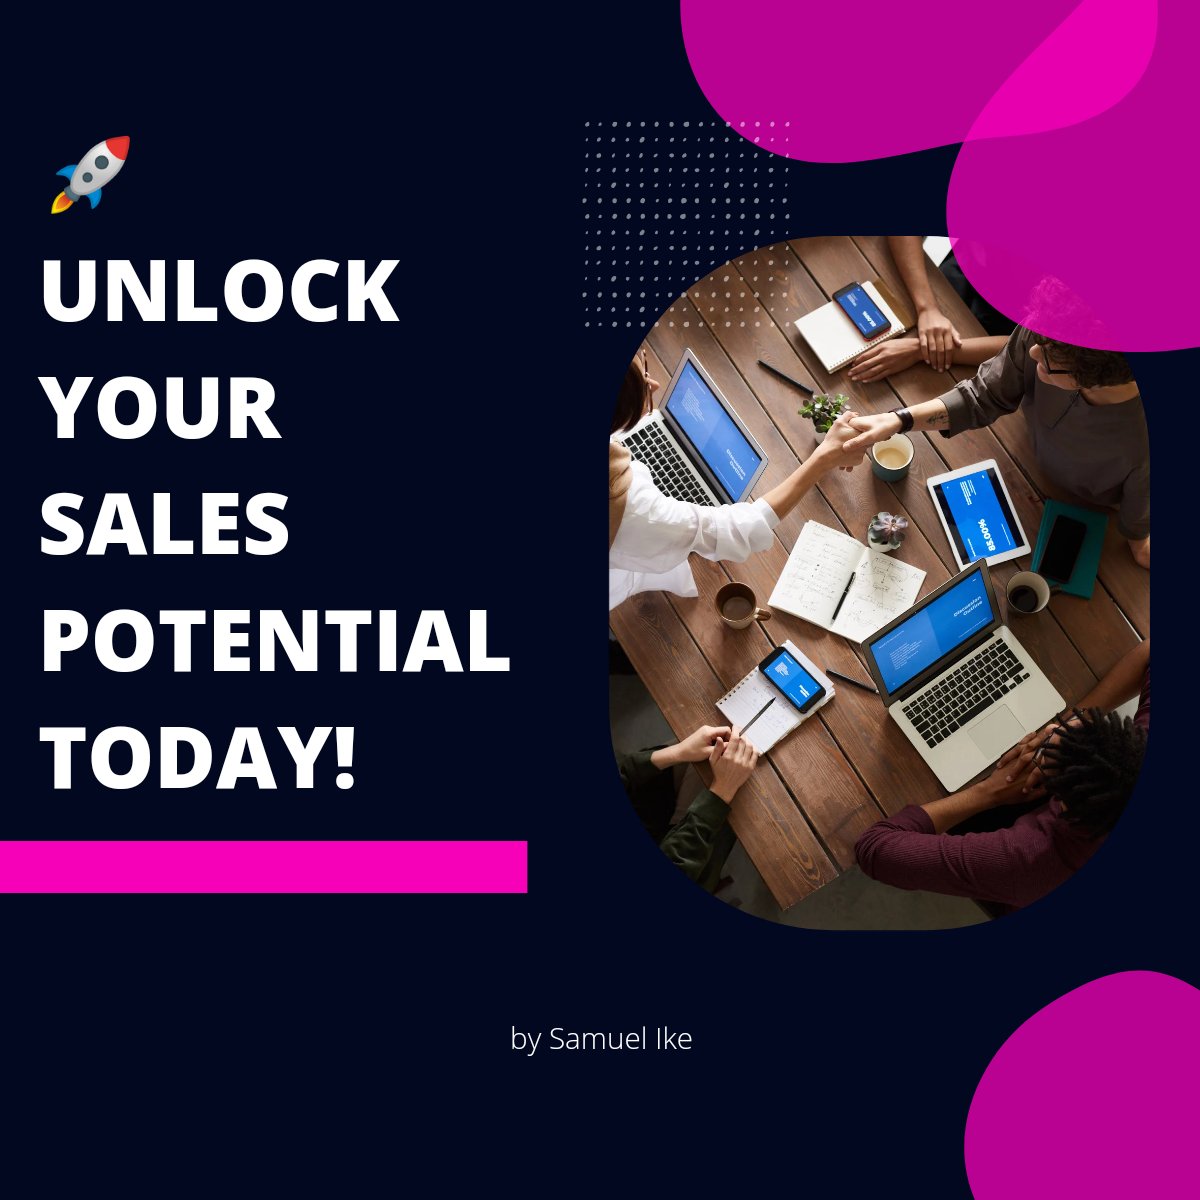 Are you ready to supercharge your sales skills and become a top-notch closer? 

linkedin.com/posts/freelanc… 

#SalesTraining #SalesClosers #SalesSuccess #SalesSkills #AIDAFramework #SalesPros #CareerGrowth #SalesTrainingProgram #BoostYourSales #JoinUsToday #UnlockYourPotential